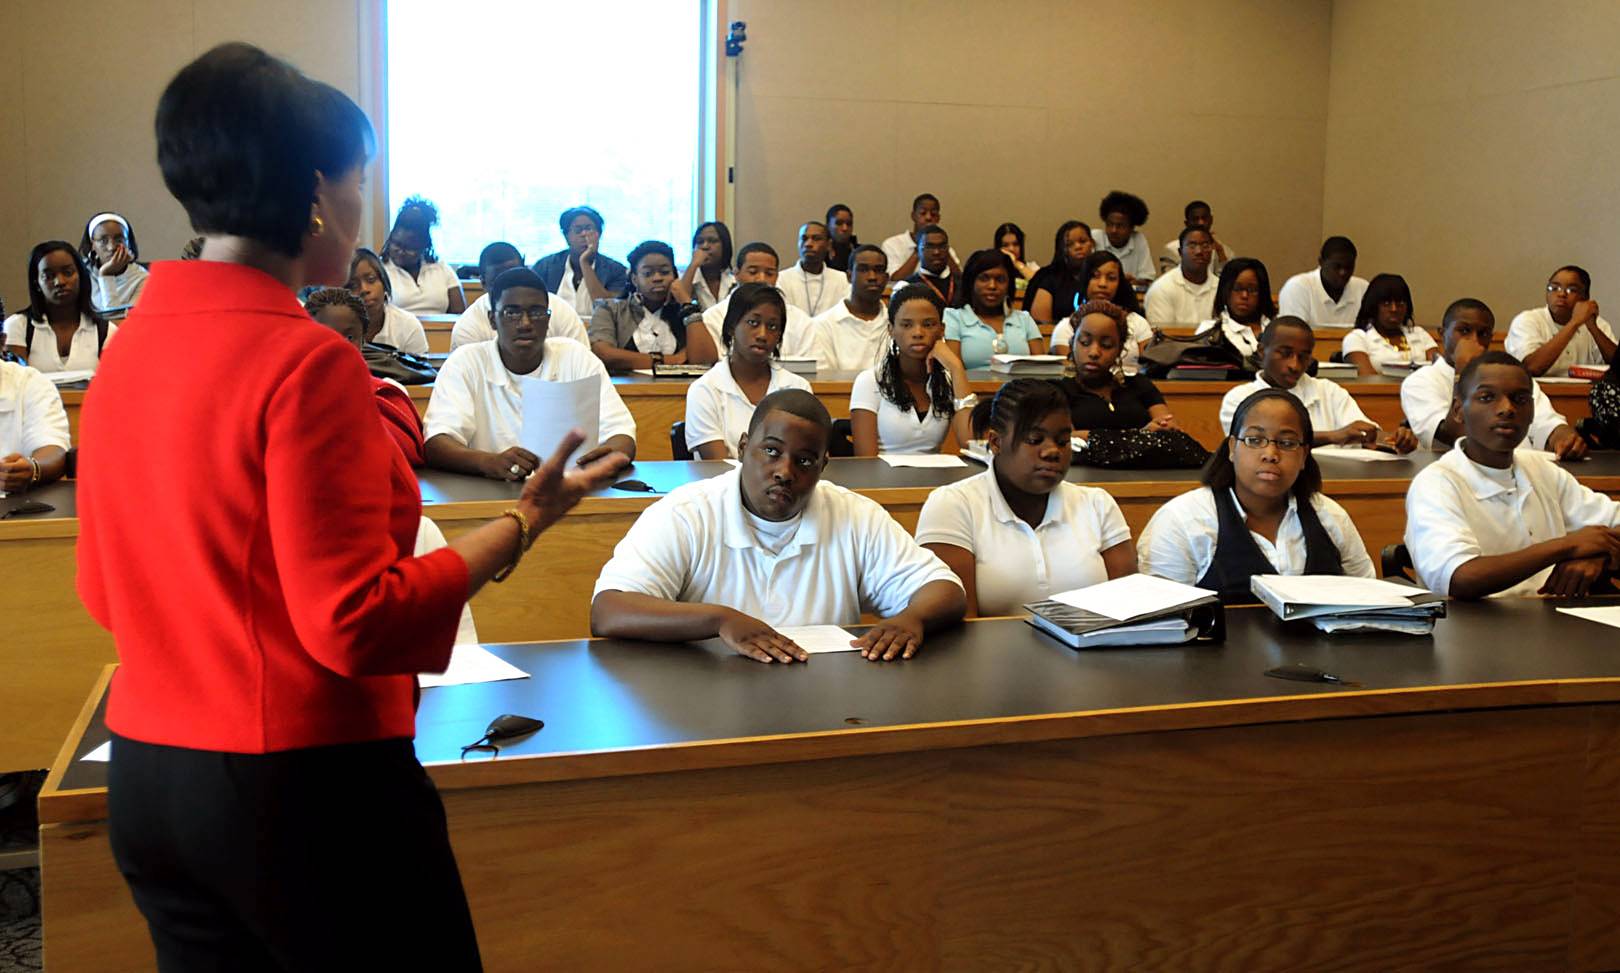 Education - Many cities and states across the nation have already made big cuts at all levels of their public school systems. Given the achievement disparities between African-American and white students, and the critical need to engage minority students in the science, technology, engineering and math fields, a default would exacerbate the achievement level gaps.(Photo: Birmingham News/Landov)